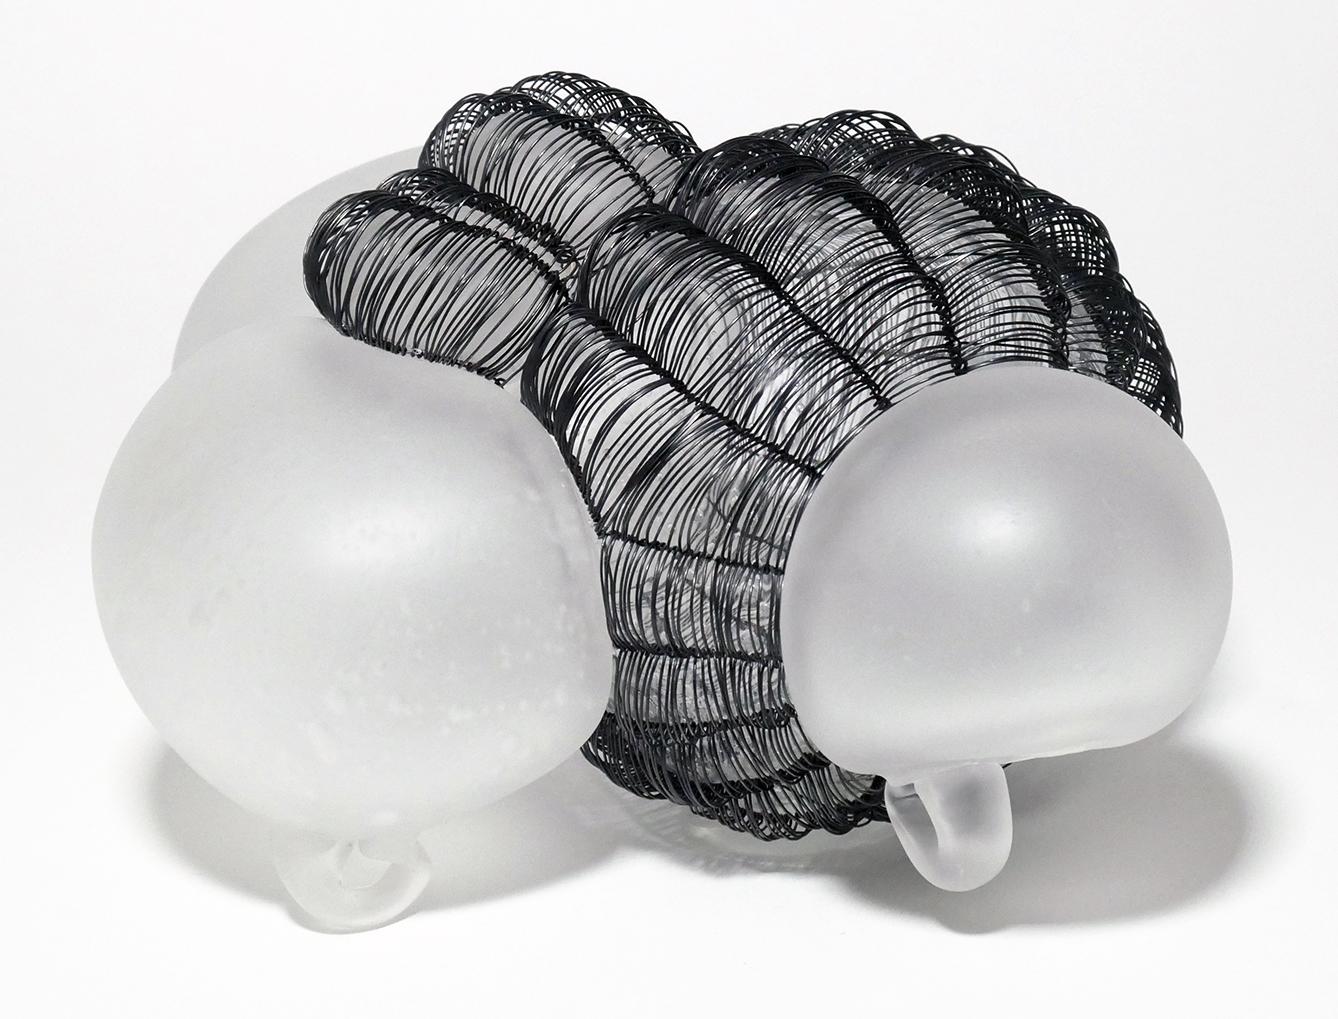 Beth Dary Abstract Sculpture - Caged 2, biomorphic hand-blown glass and woven steel wire sculpture